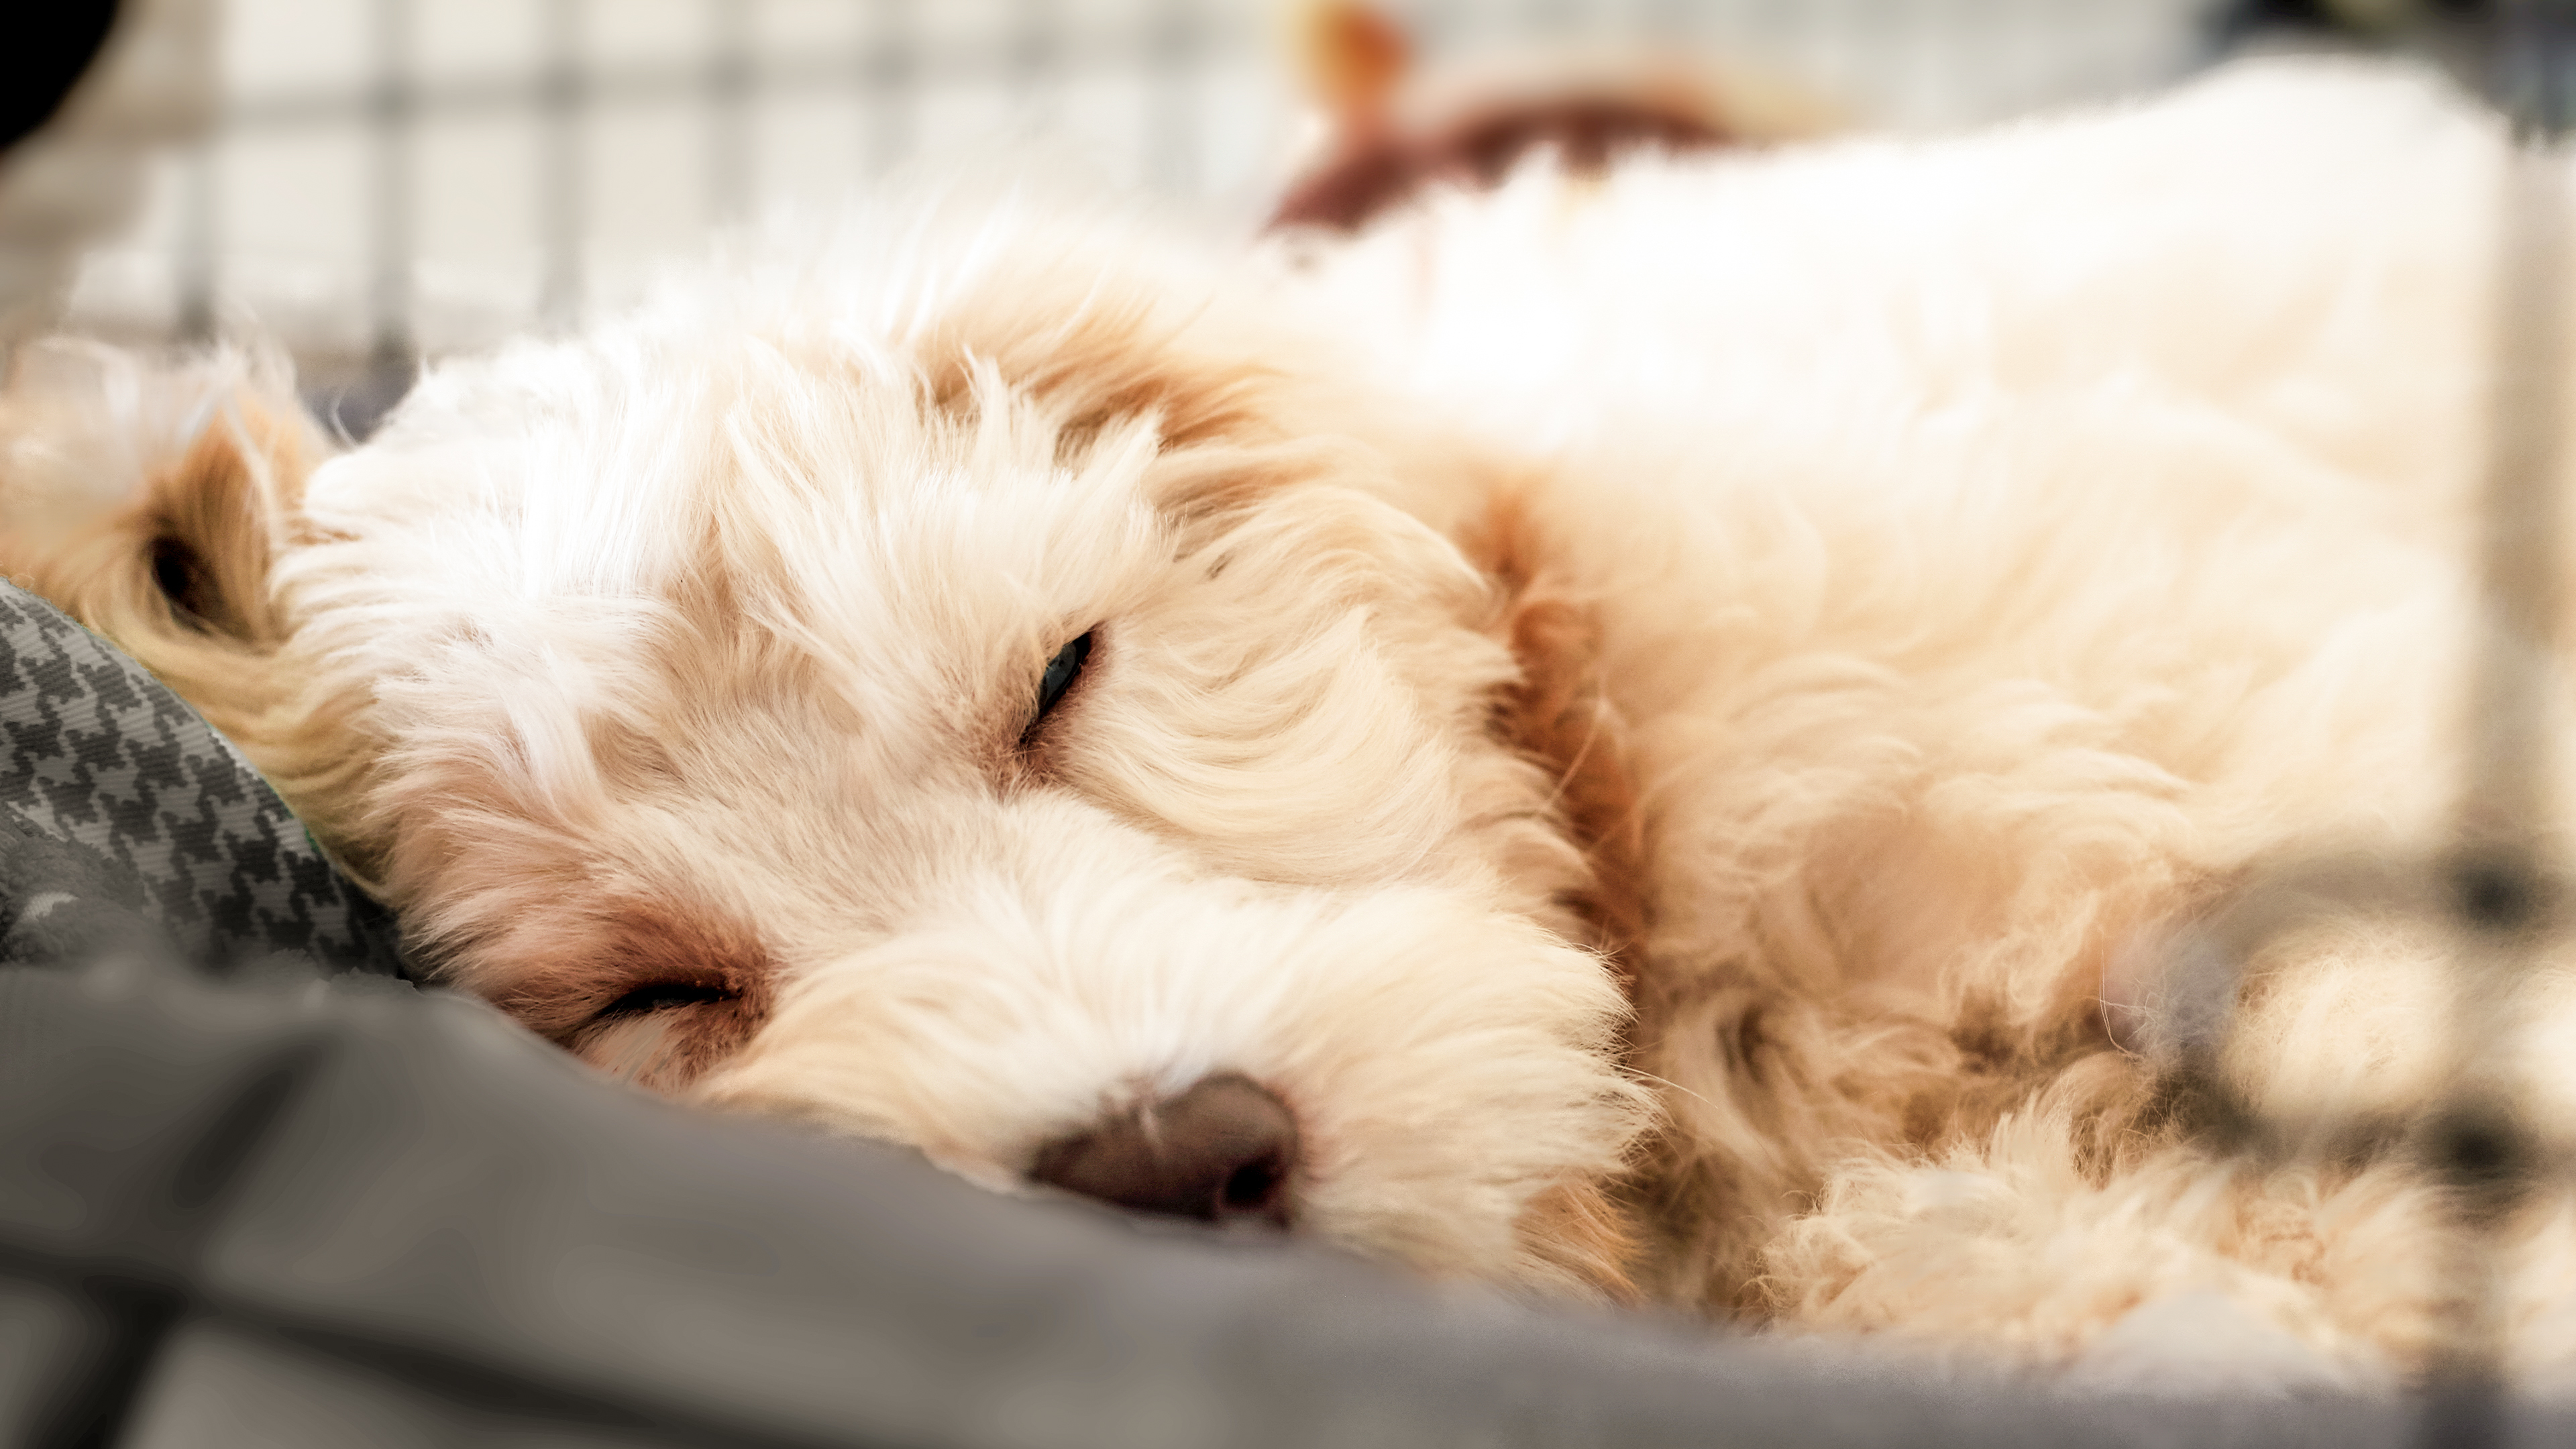 Puppy sleeping in a puppy crate